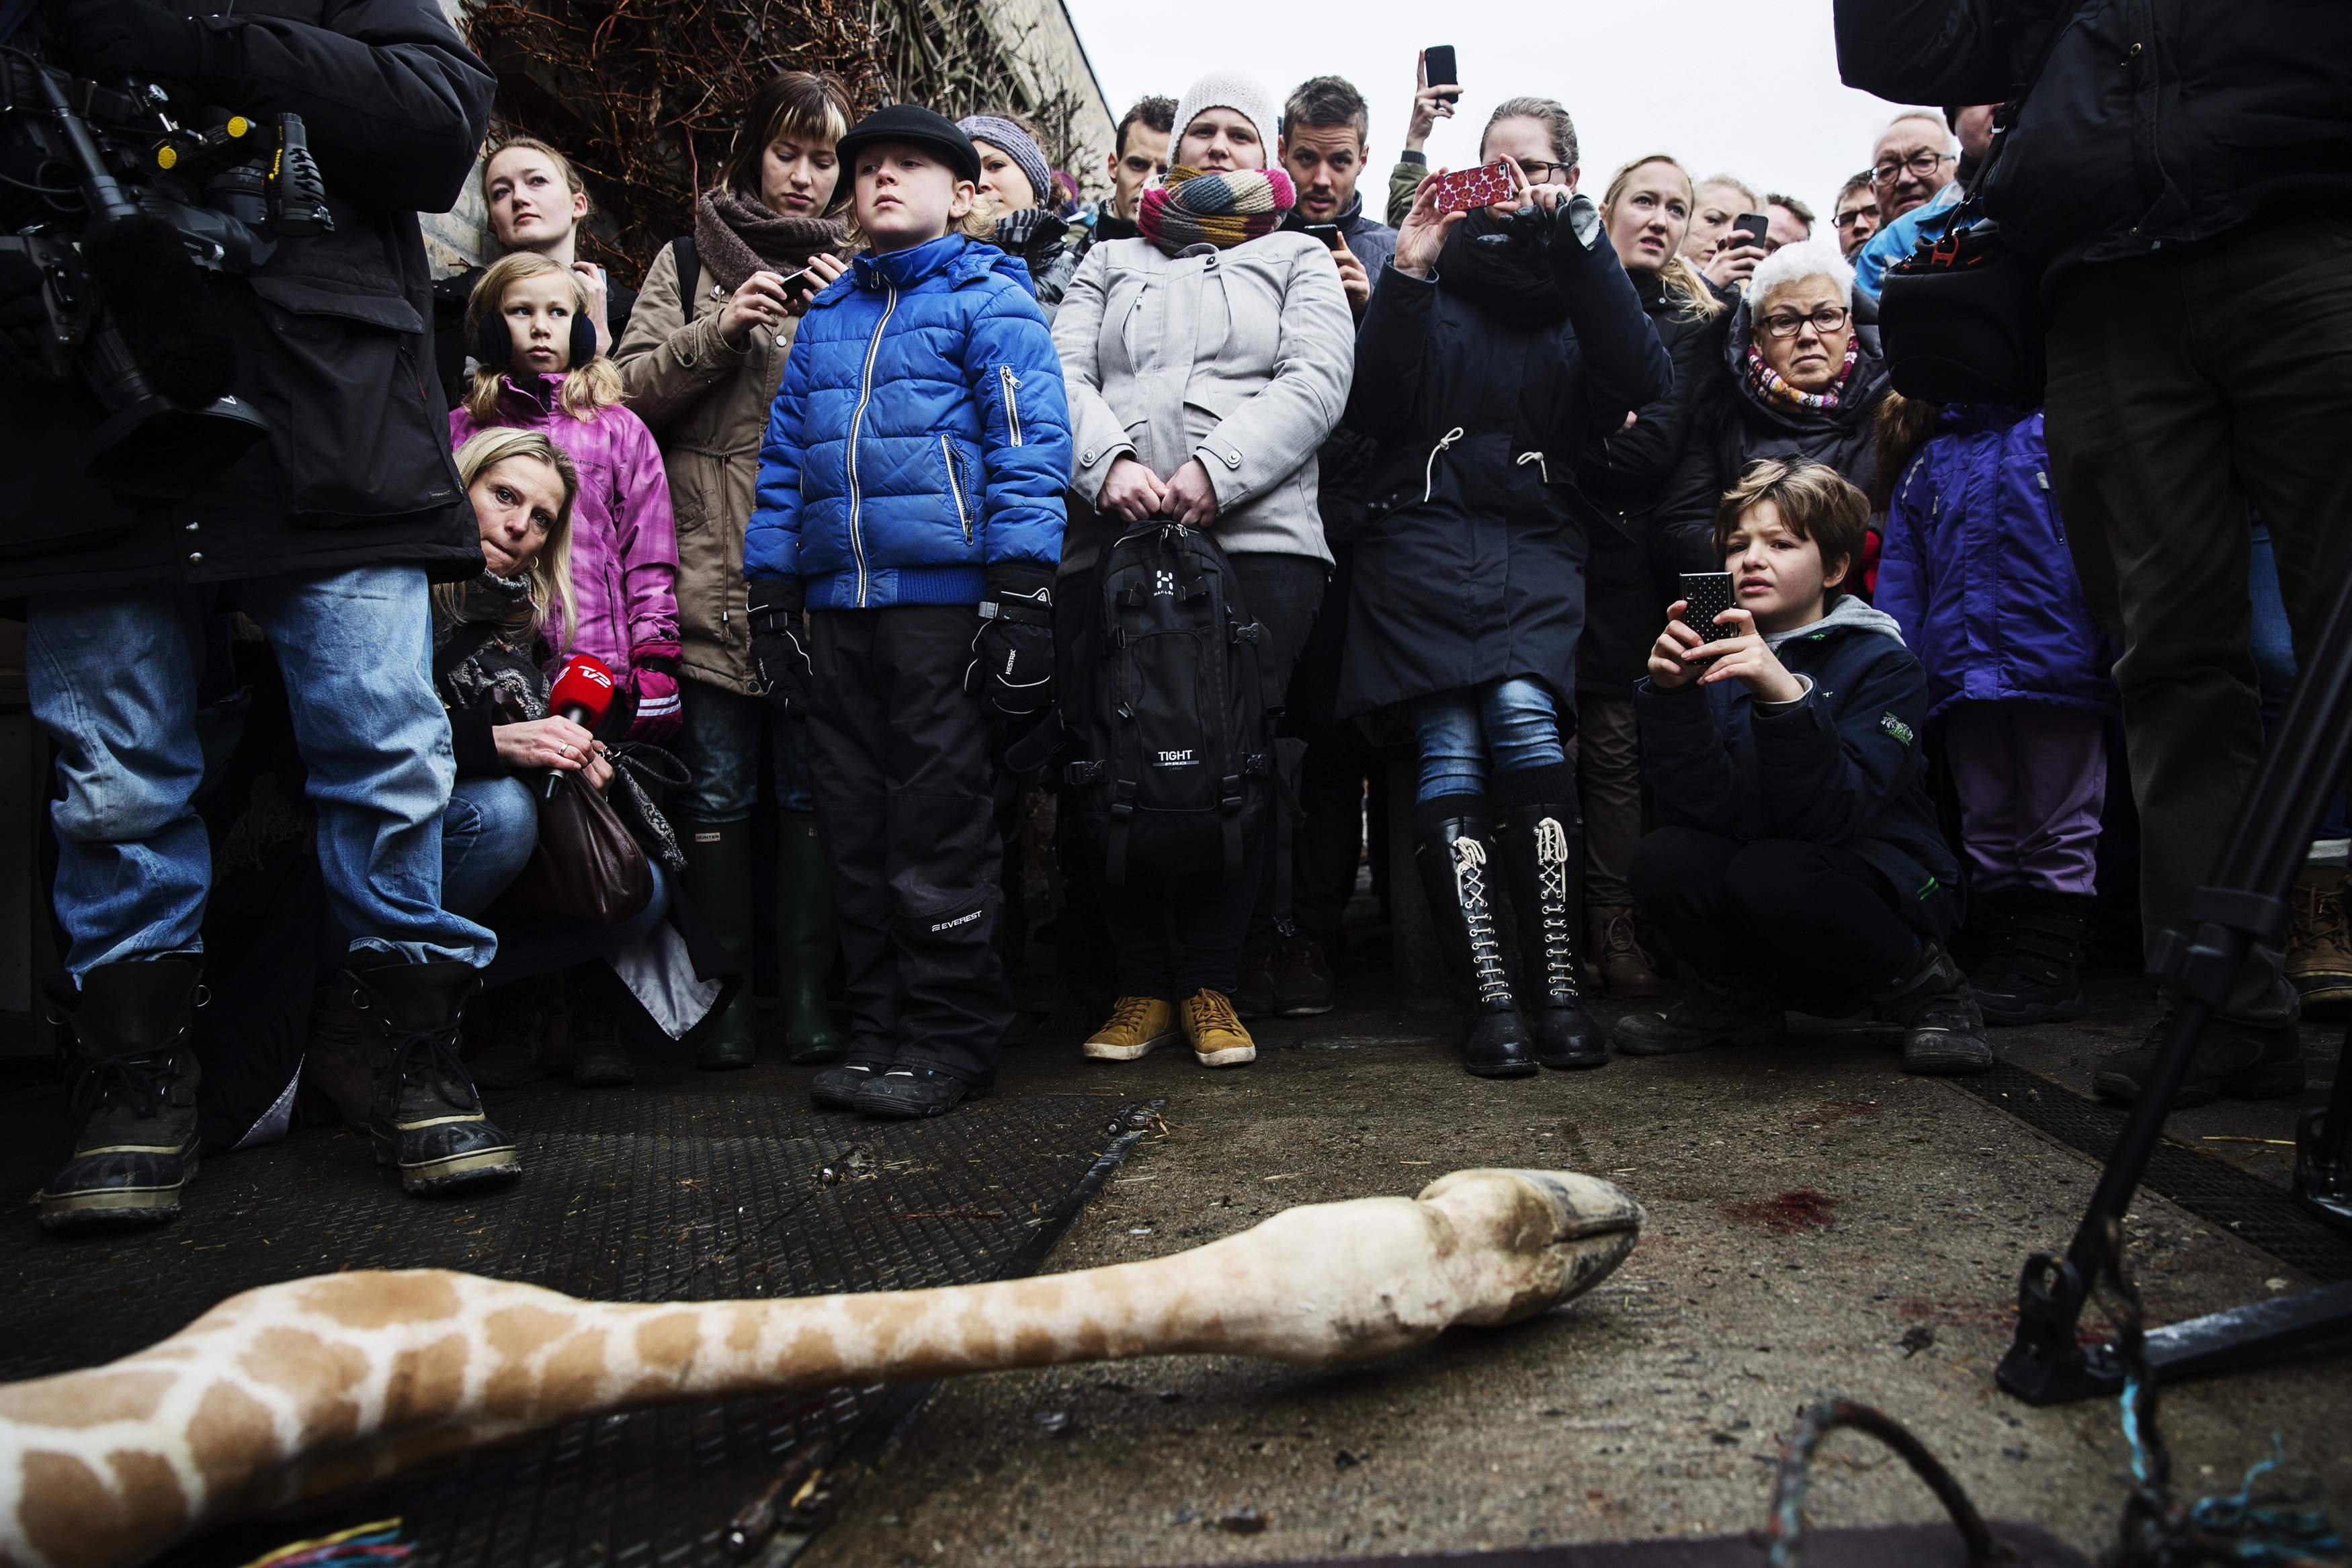 People look at the carcass of the giraffe Marius after it was killed in Copenhagen Zoo Feb. 9, 2014. The Copenhagen Zoo went ahead with a plan to shoot and dismember a healthy giraffe on Sunday and feed the 18-month-old animal's carcass to lions - an action the zoo said was in line with anti-inbreeding rules meant to ensure a healthy giraffe population. The giraffe, named Marius, was shot in the head and then cut apart in view of children, according to a video of the incident released by the Denmark-based production company Localize.